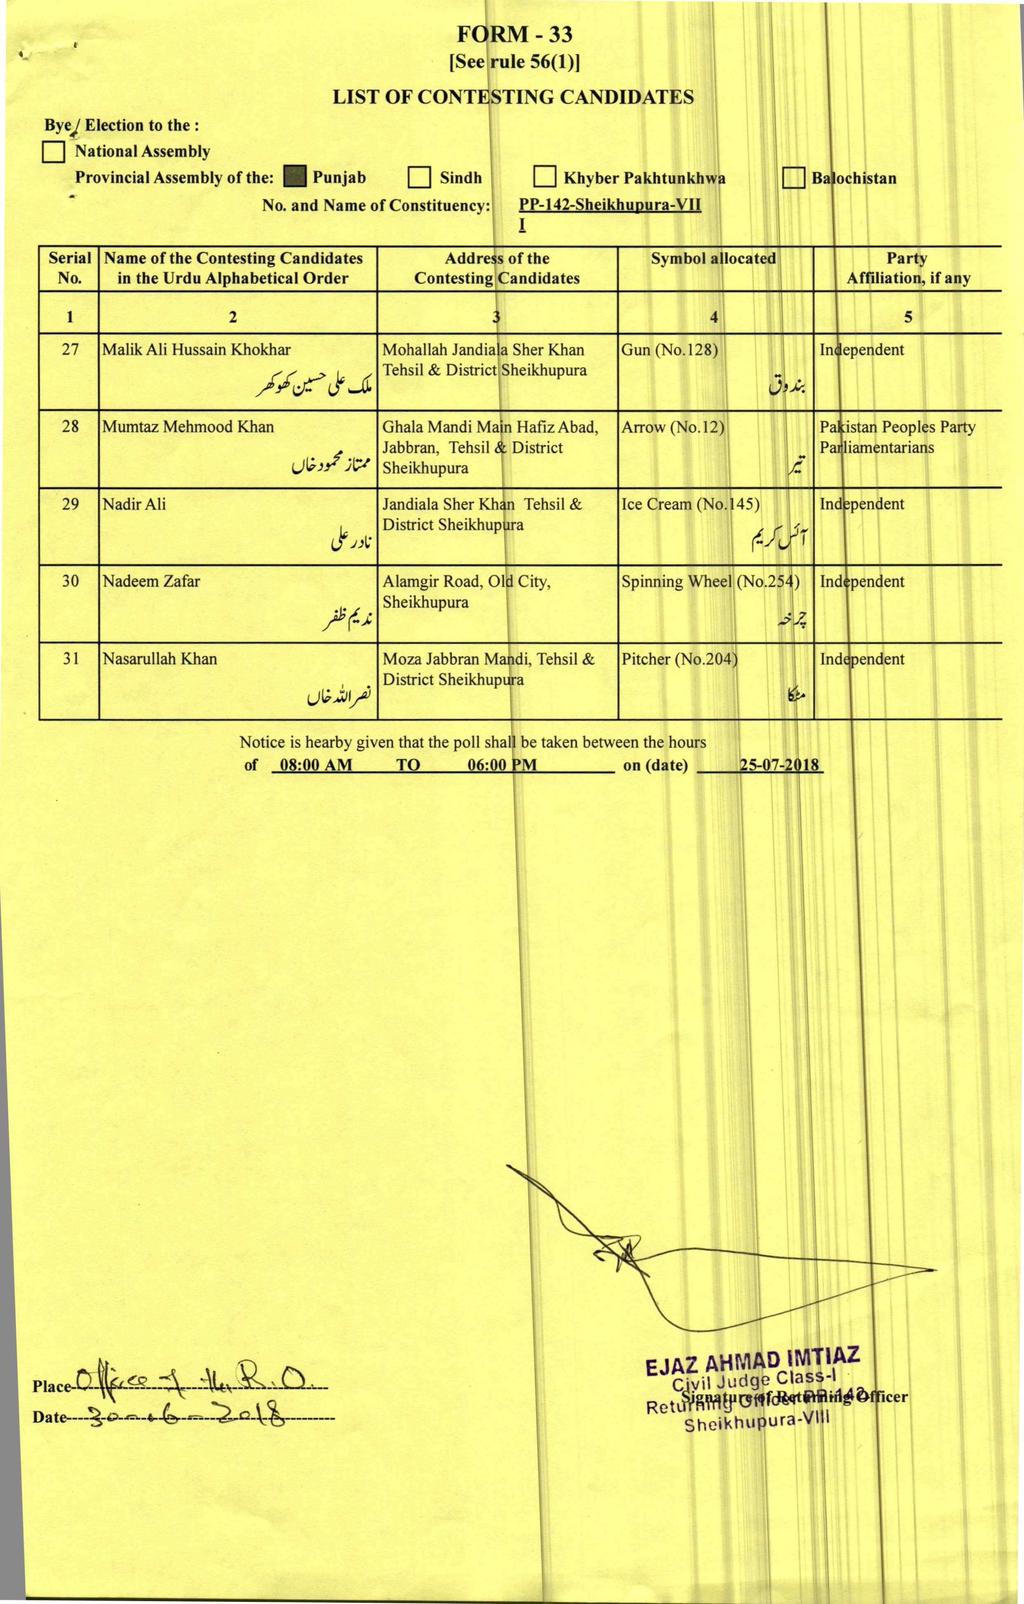 FORM 9-33 [See rule 56(1)] LIST OF CONT STING CANDIDATES Bye/ Election to the : El Provincial Assembly of the: Punjab j Sindh and Name of Constituency: 1 27 Khyber Pakhtunkhwa Ba ochistan